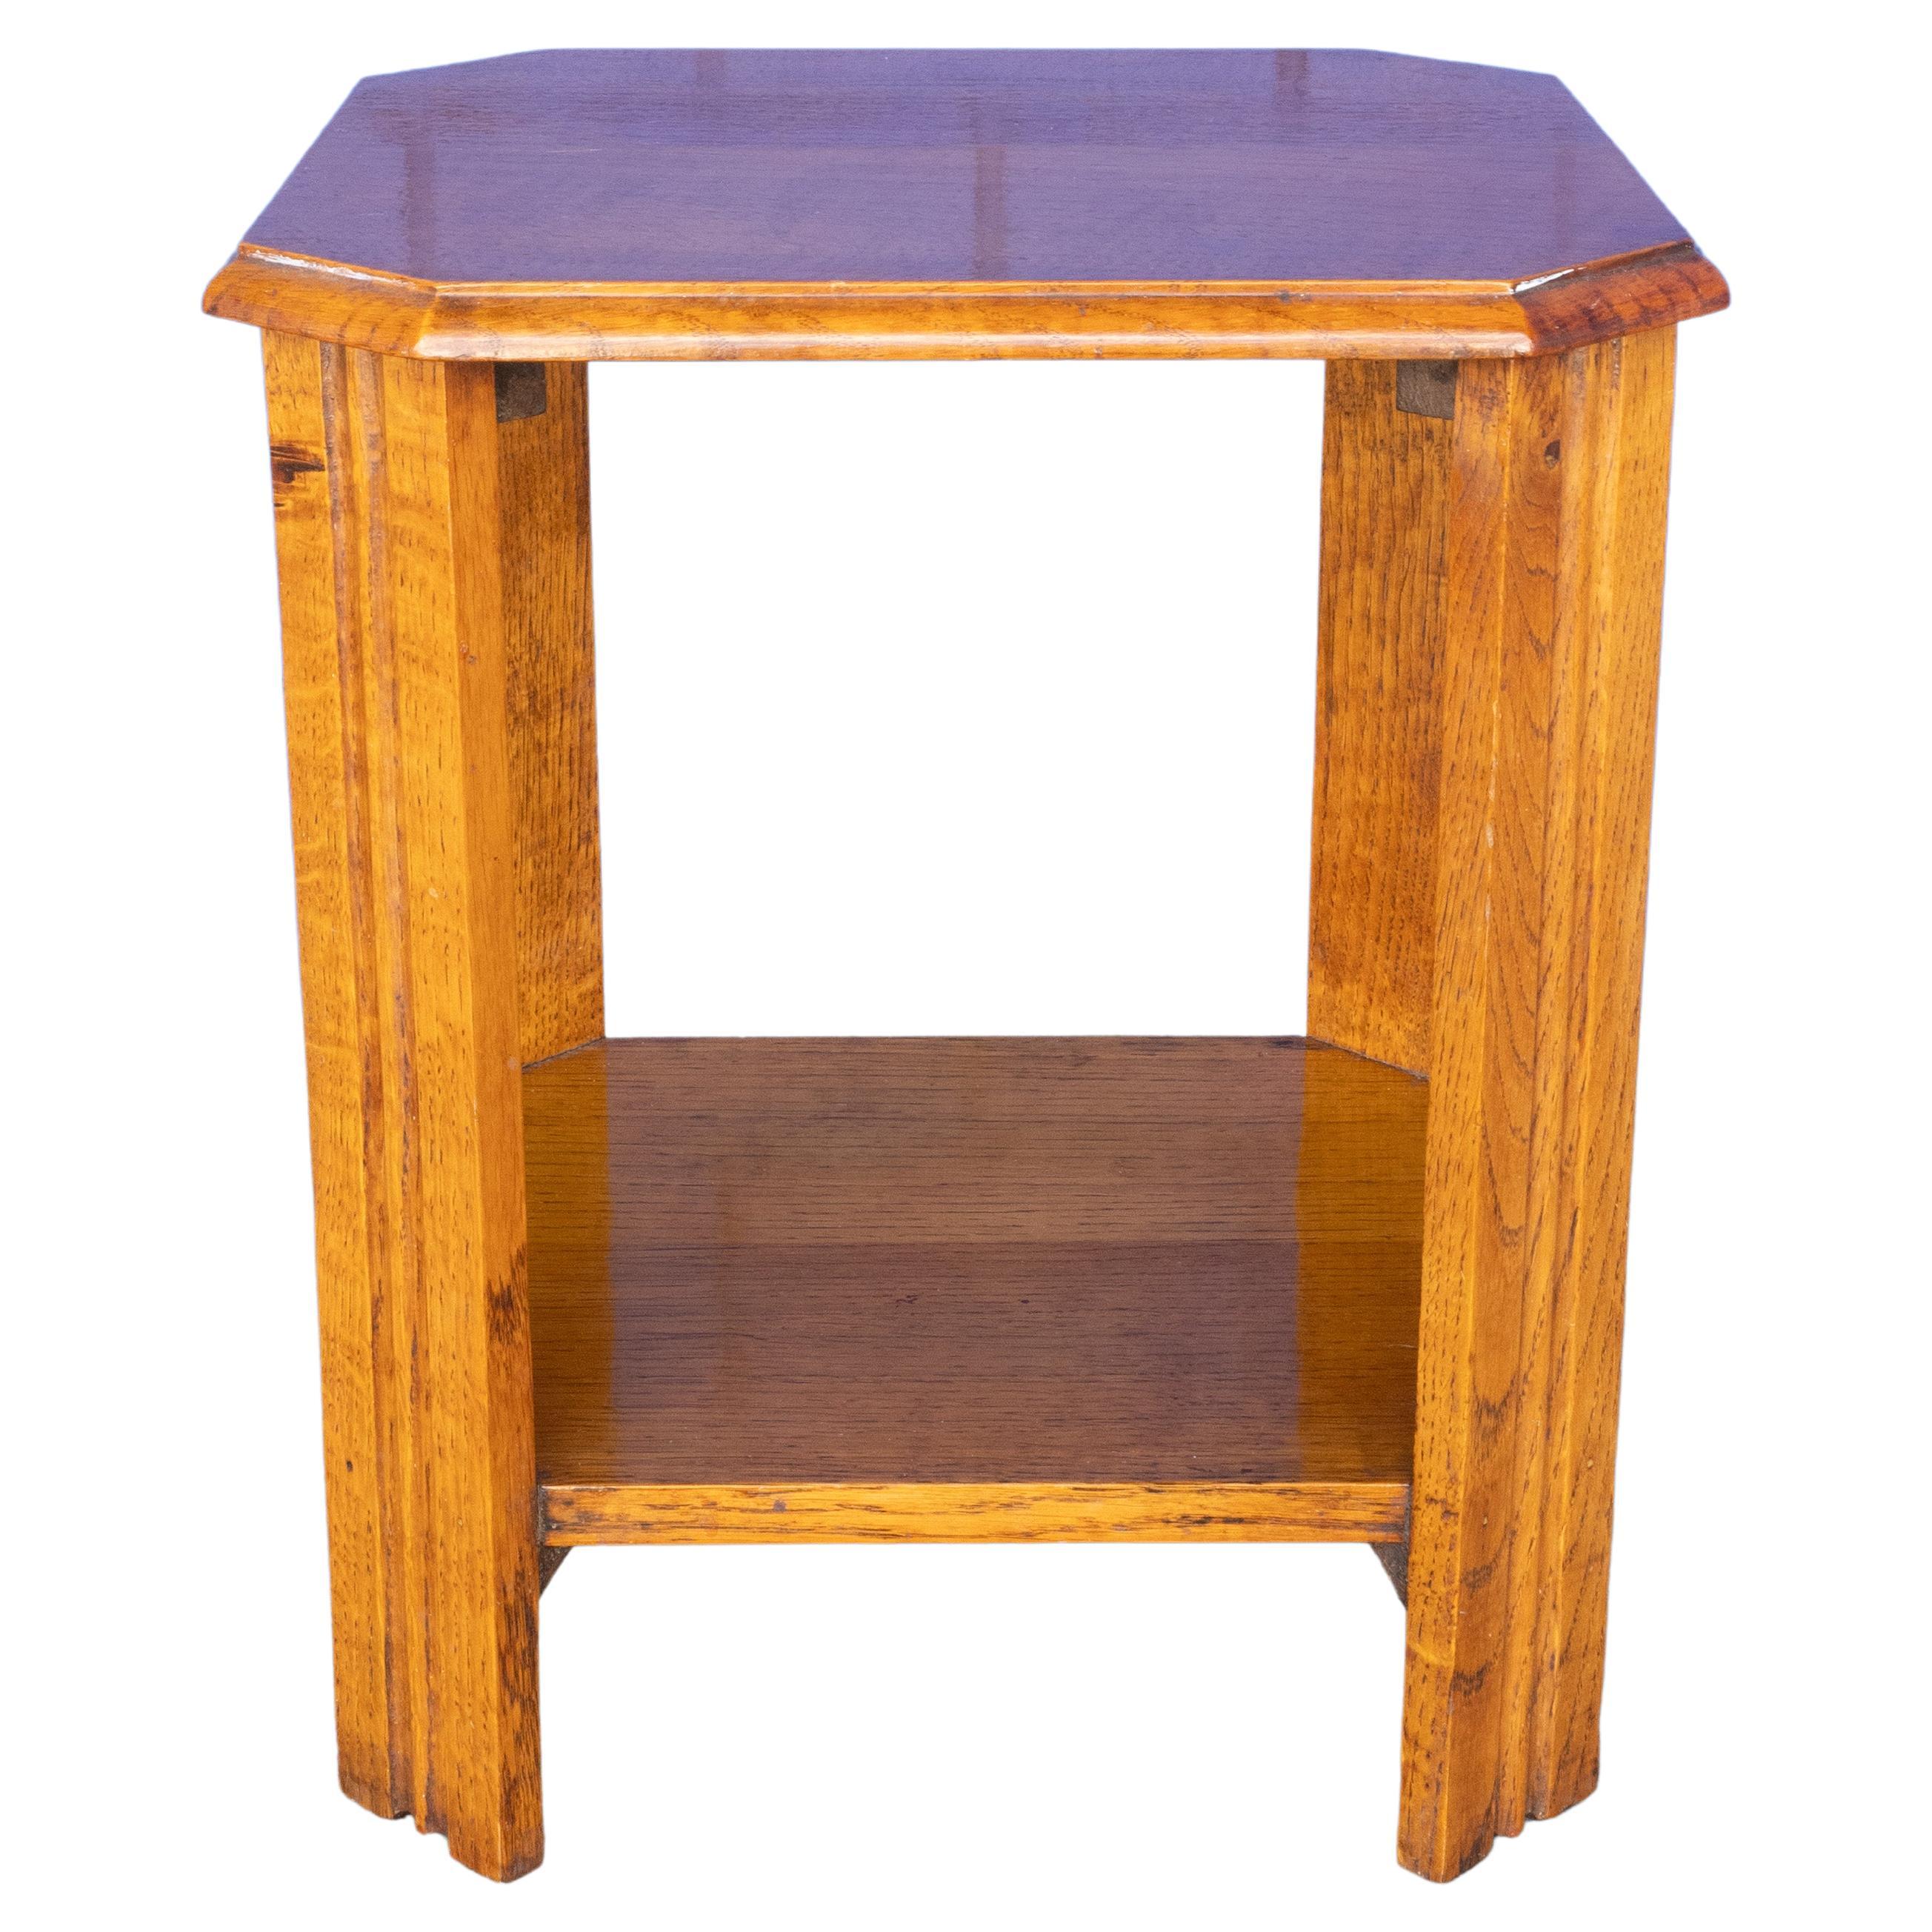 20th Century English Art Deco Oak Two-Tier Side Table, Heal & Son, London For Sale